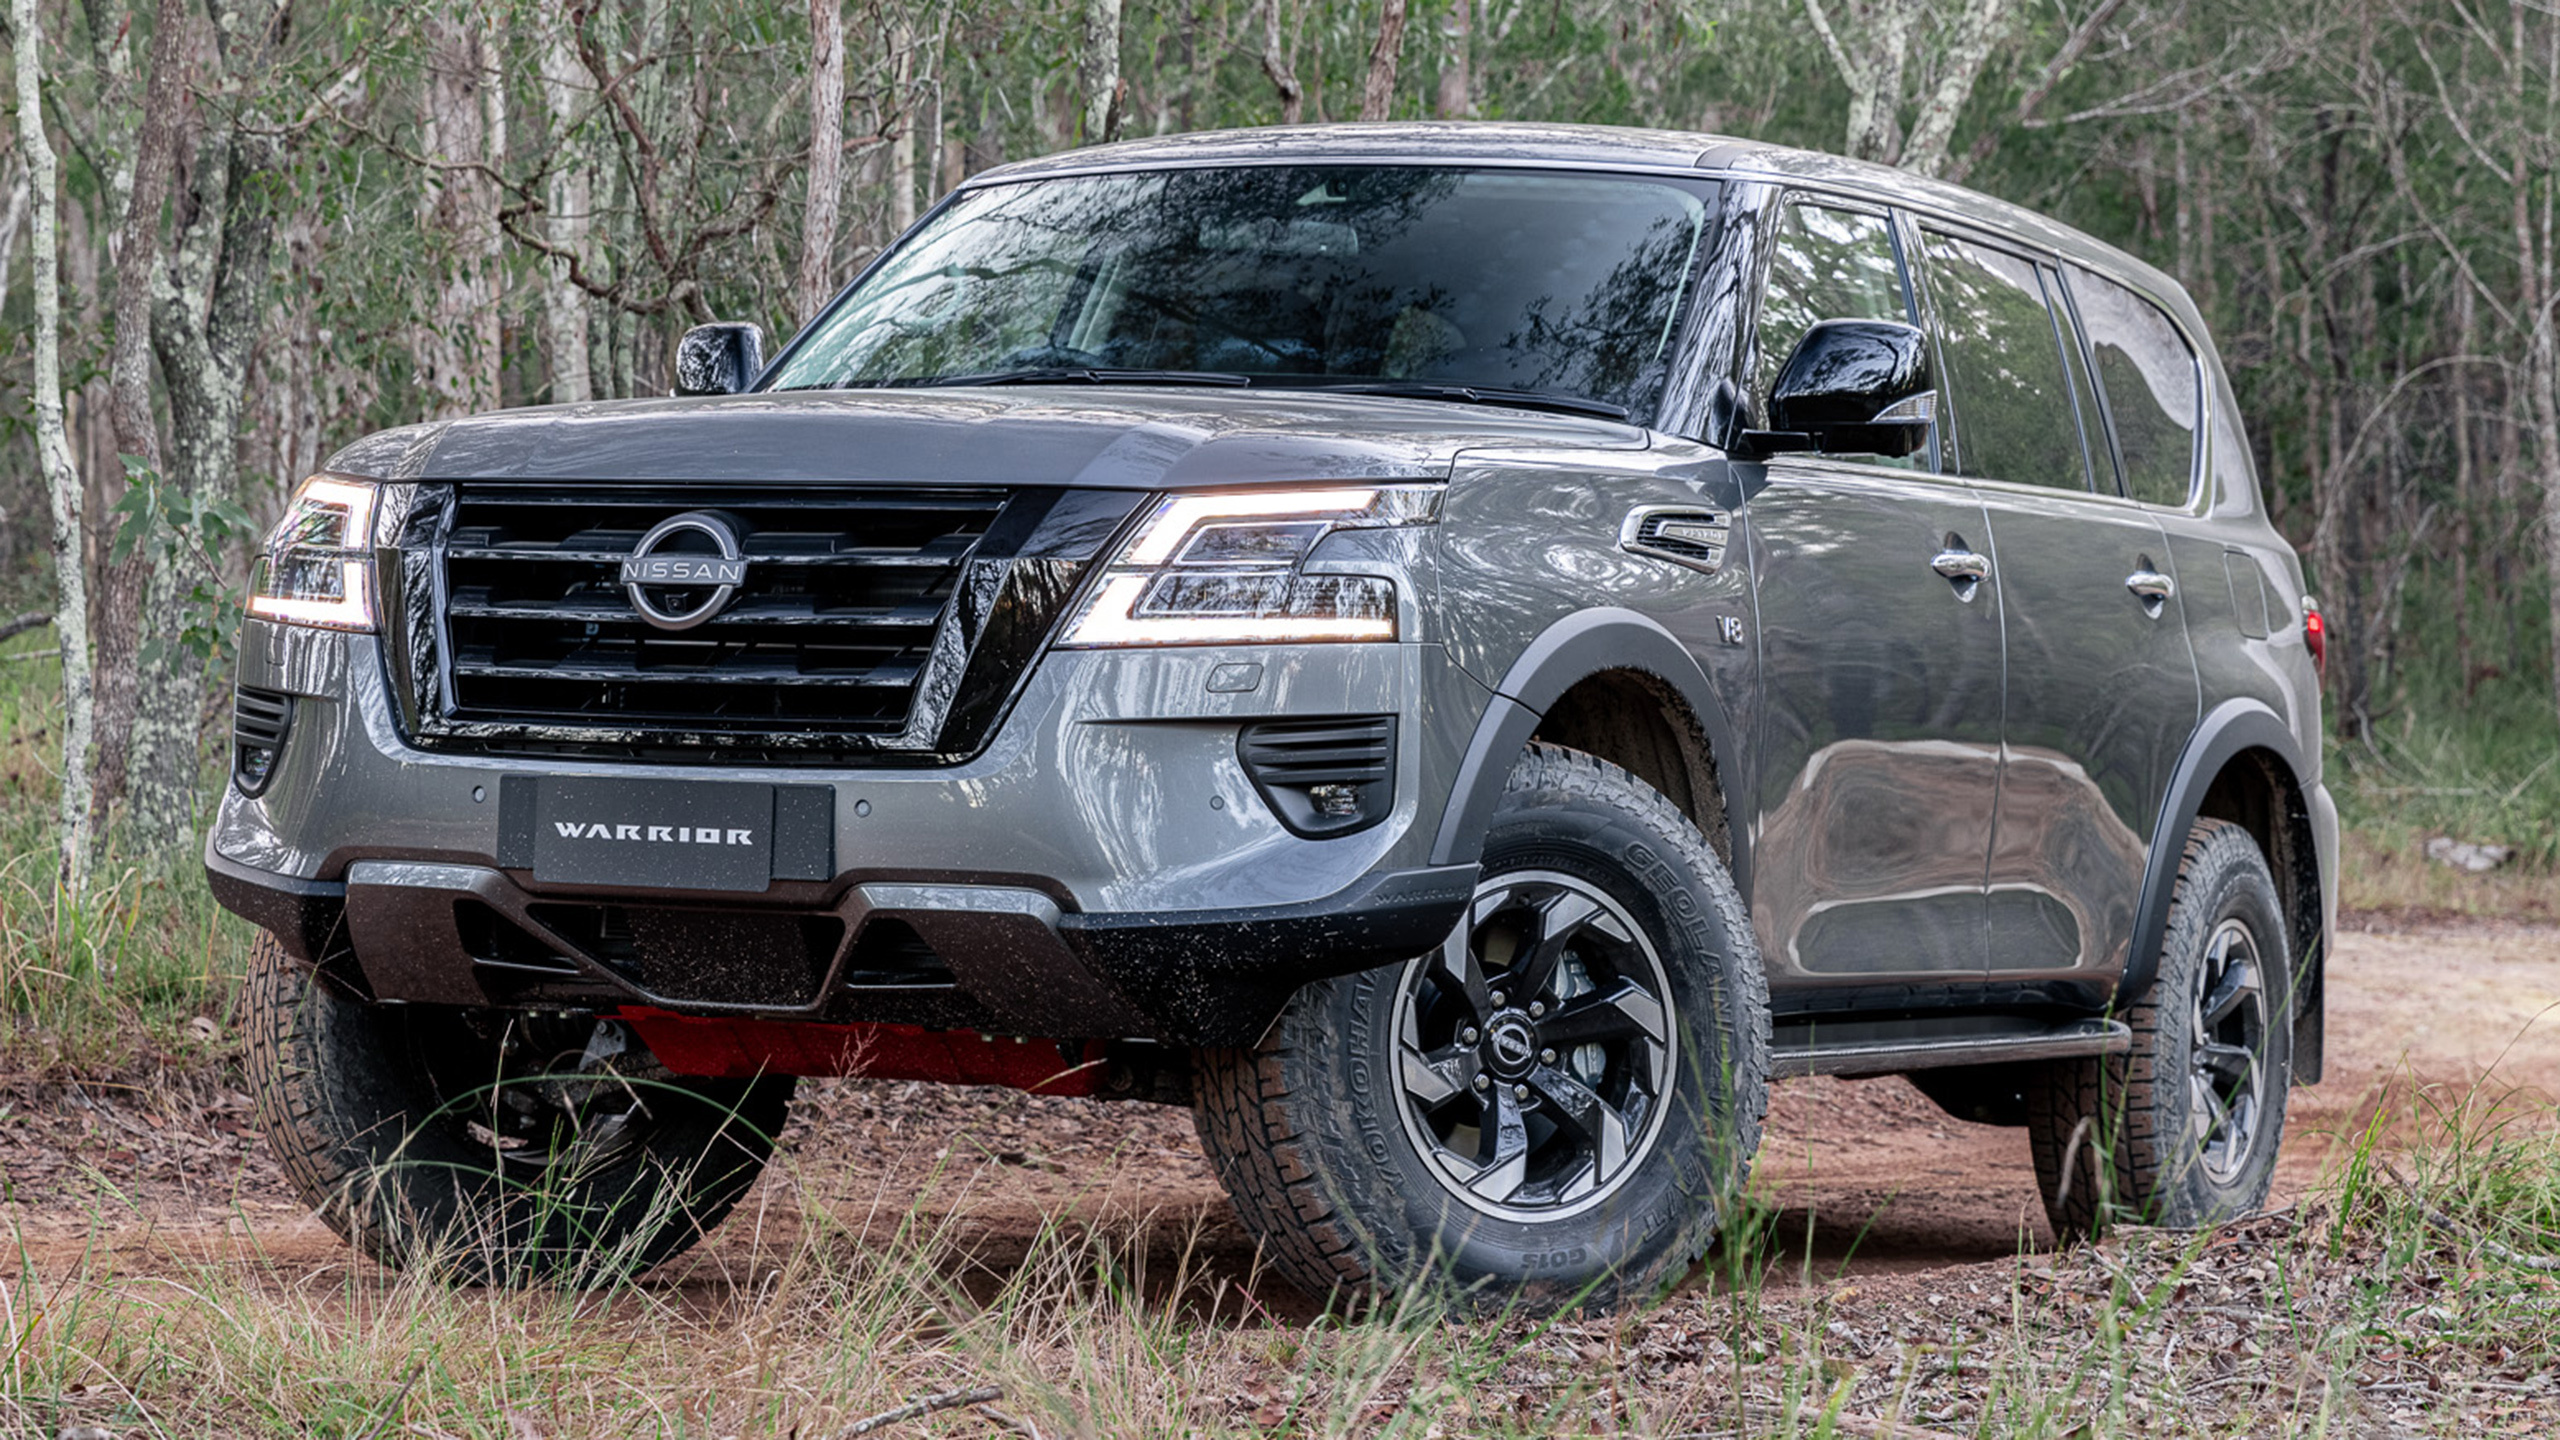 Premcar's Nissan Patrol Warrior Is At Home On Off-Road Trails